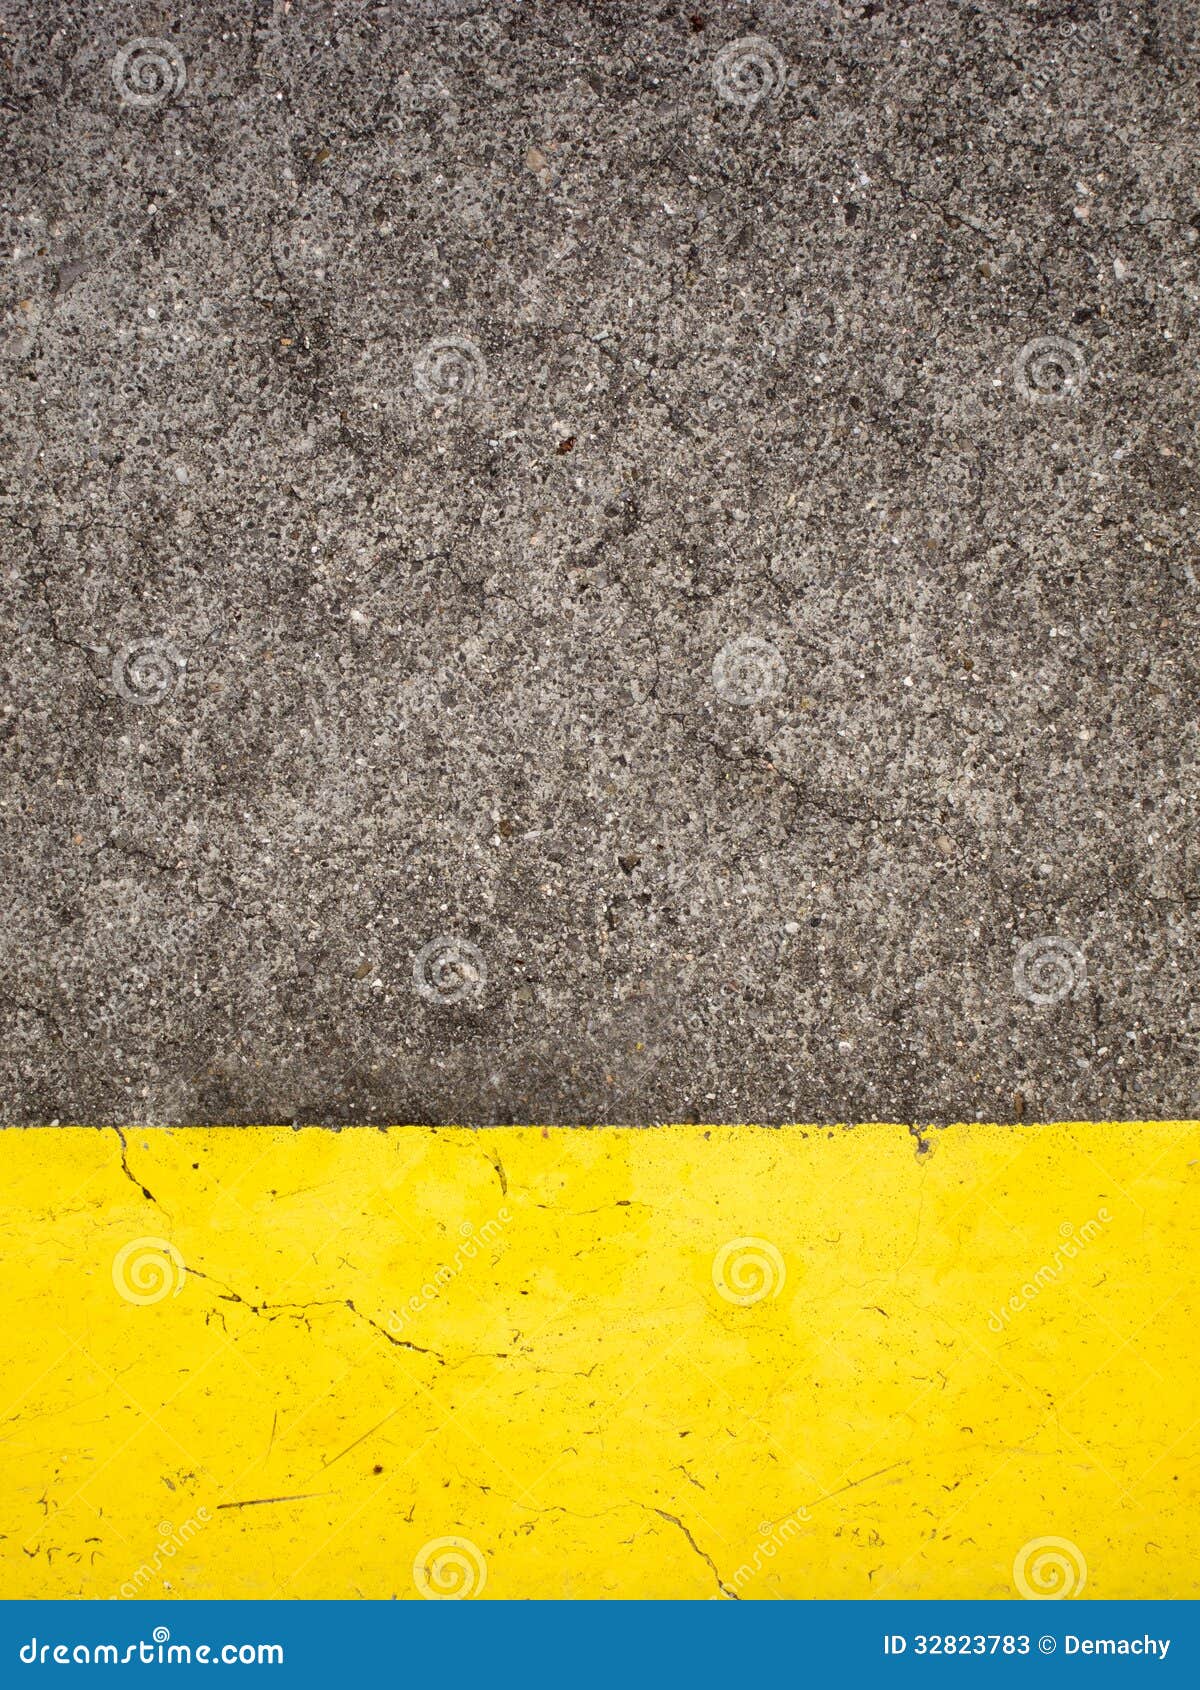 Cement and Yellow Paint stock image. Image of black, grunge - 32823783